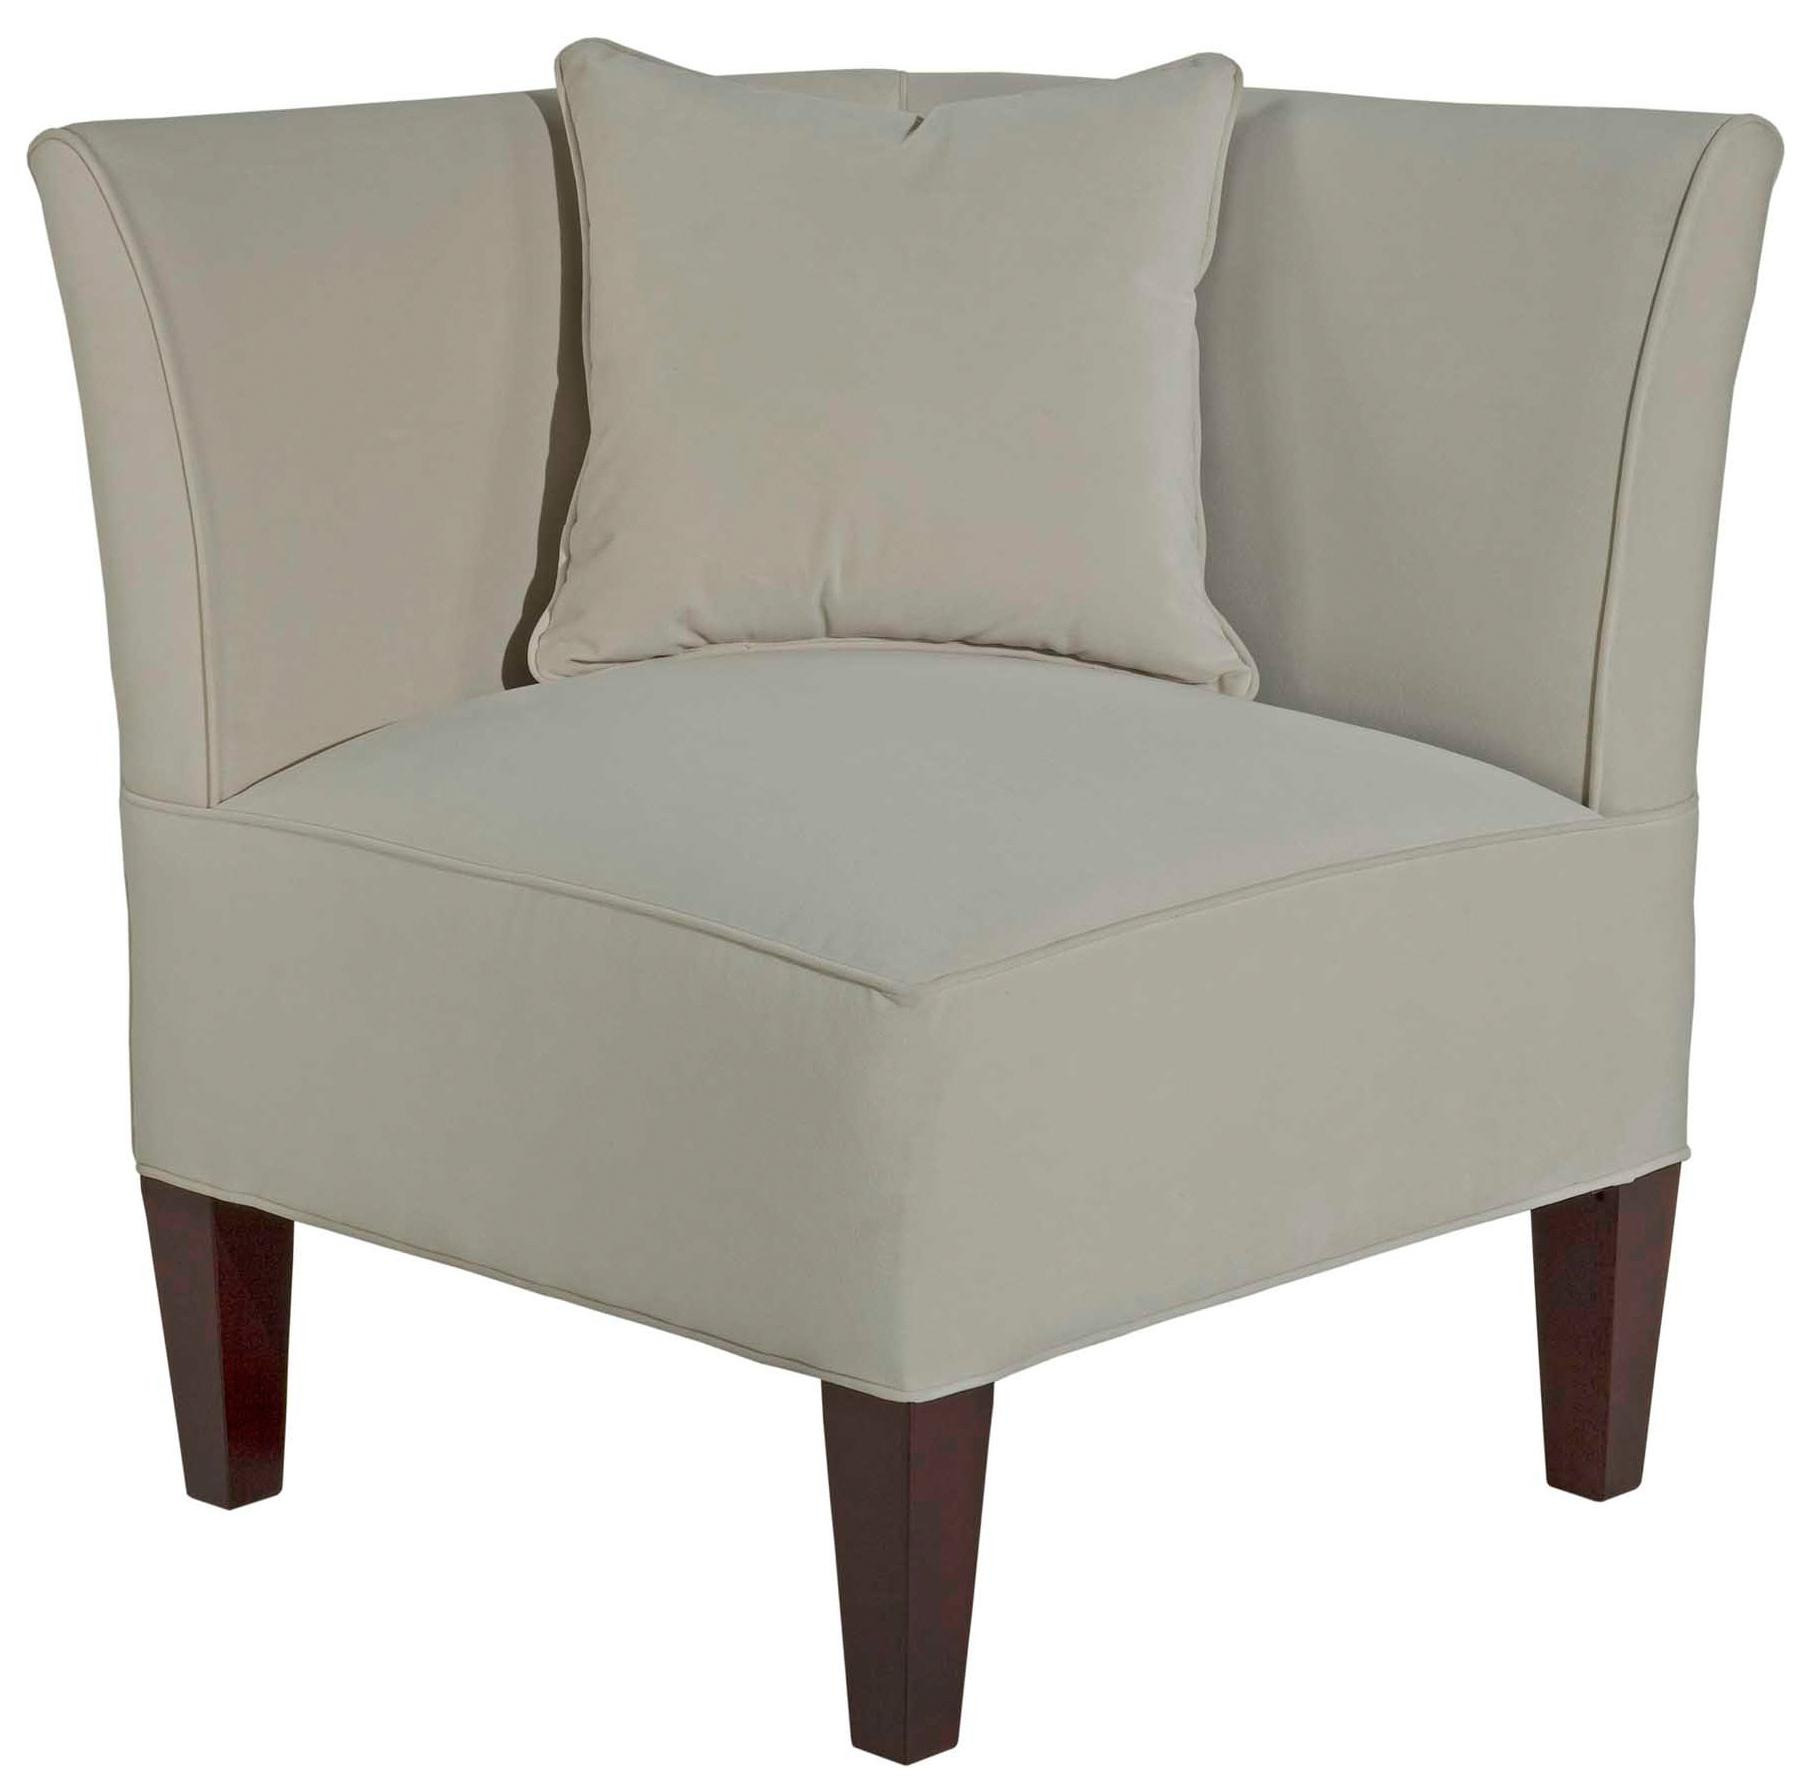 Small Corner Chair For Bedroom Awesome Broyhill Bedroom Sets Small Accent Chairs For Awesome Of Small Corner Chair For Bedroom 